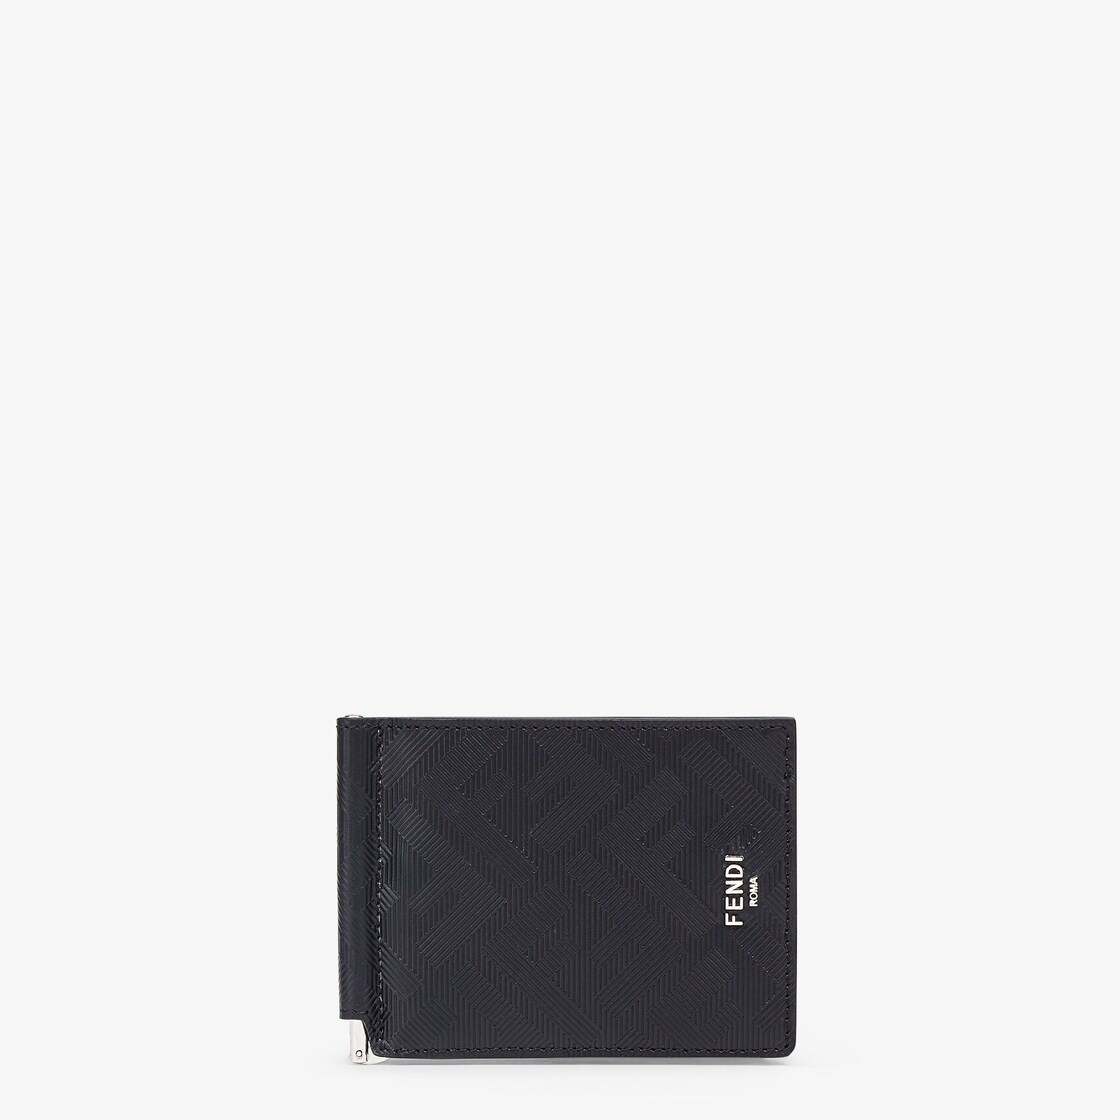 Flip-cover money clip with interior organized into six card slots. Made of black leather with emboss - 1